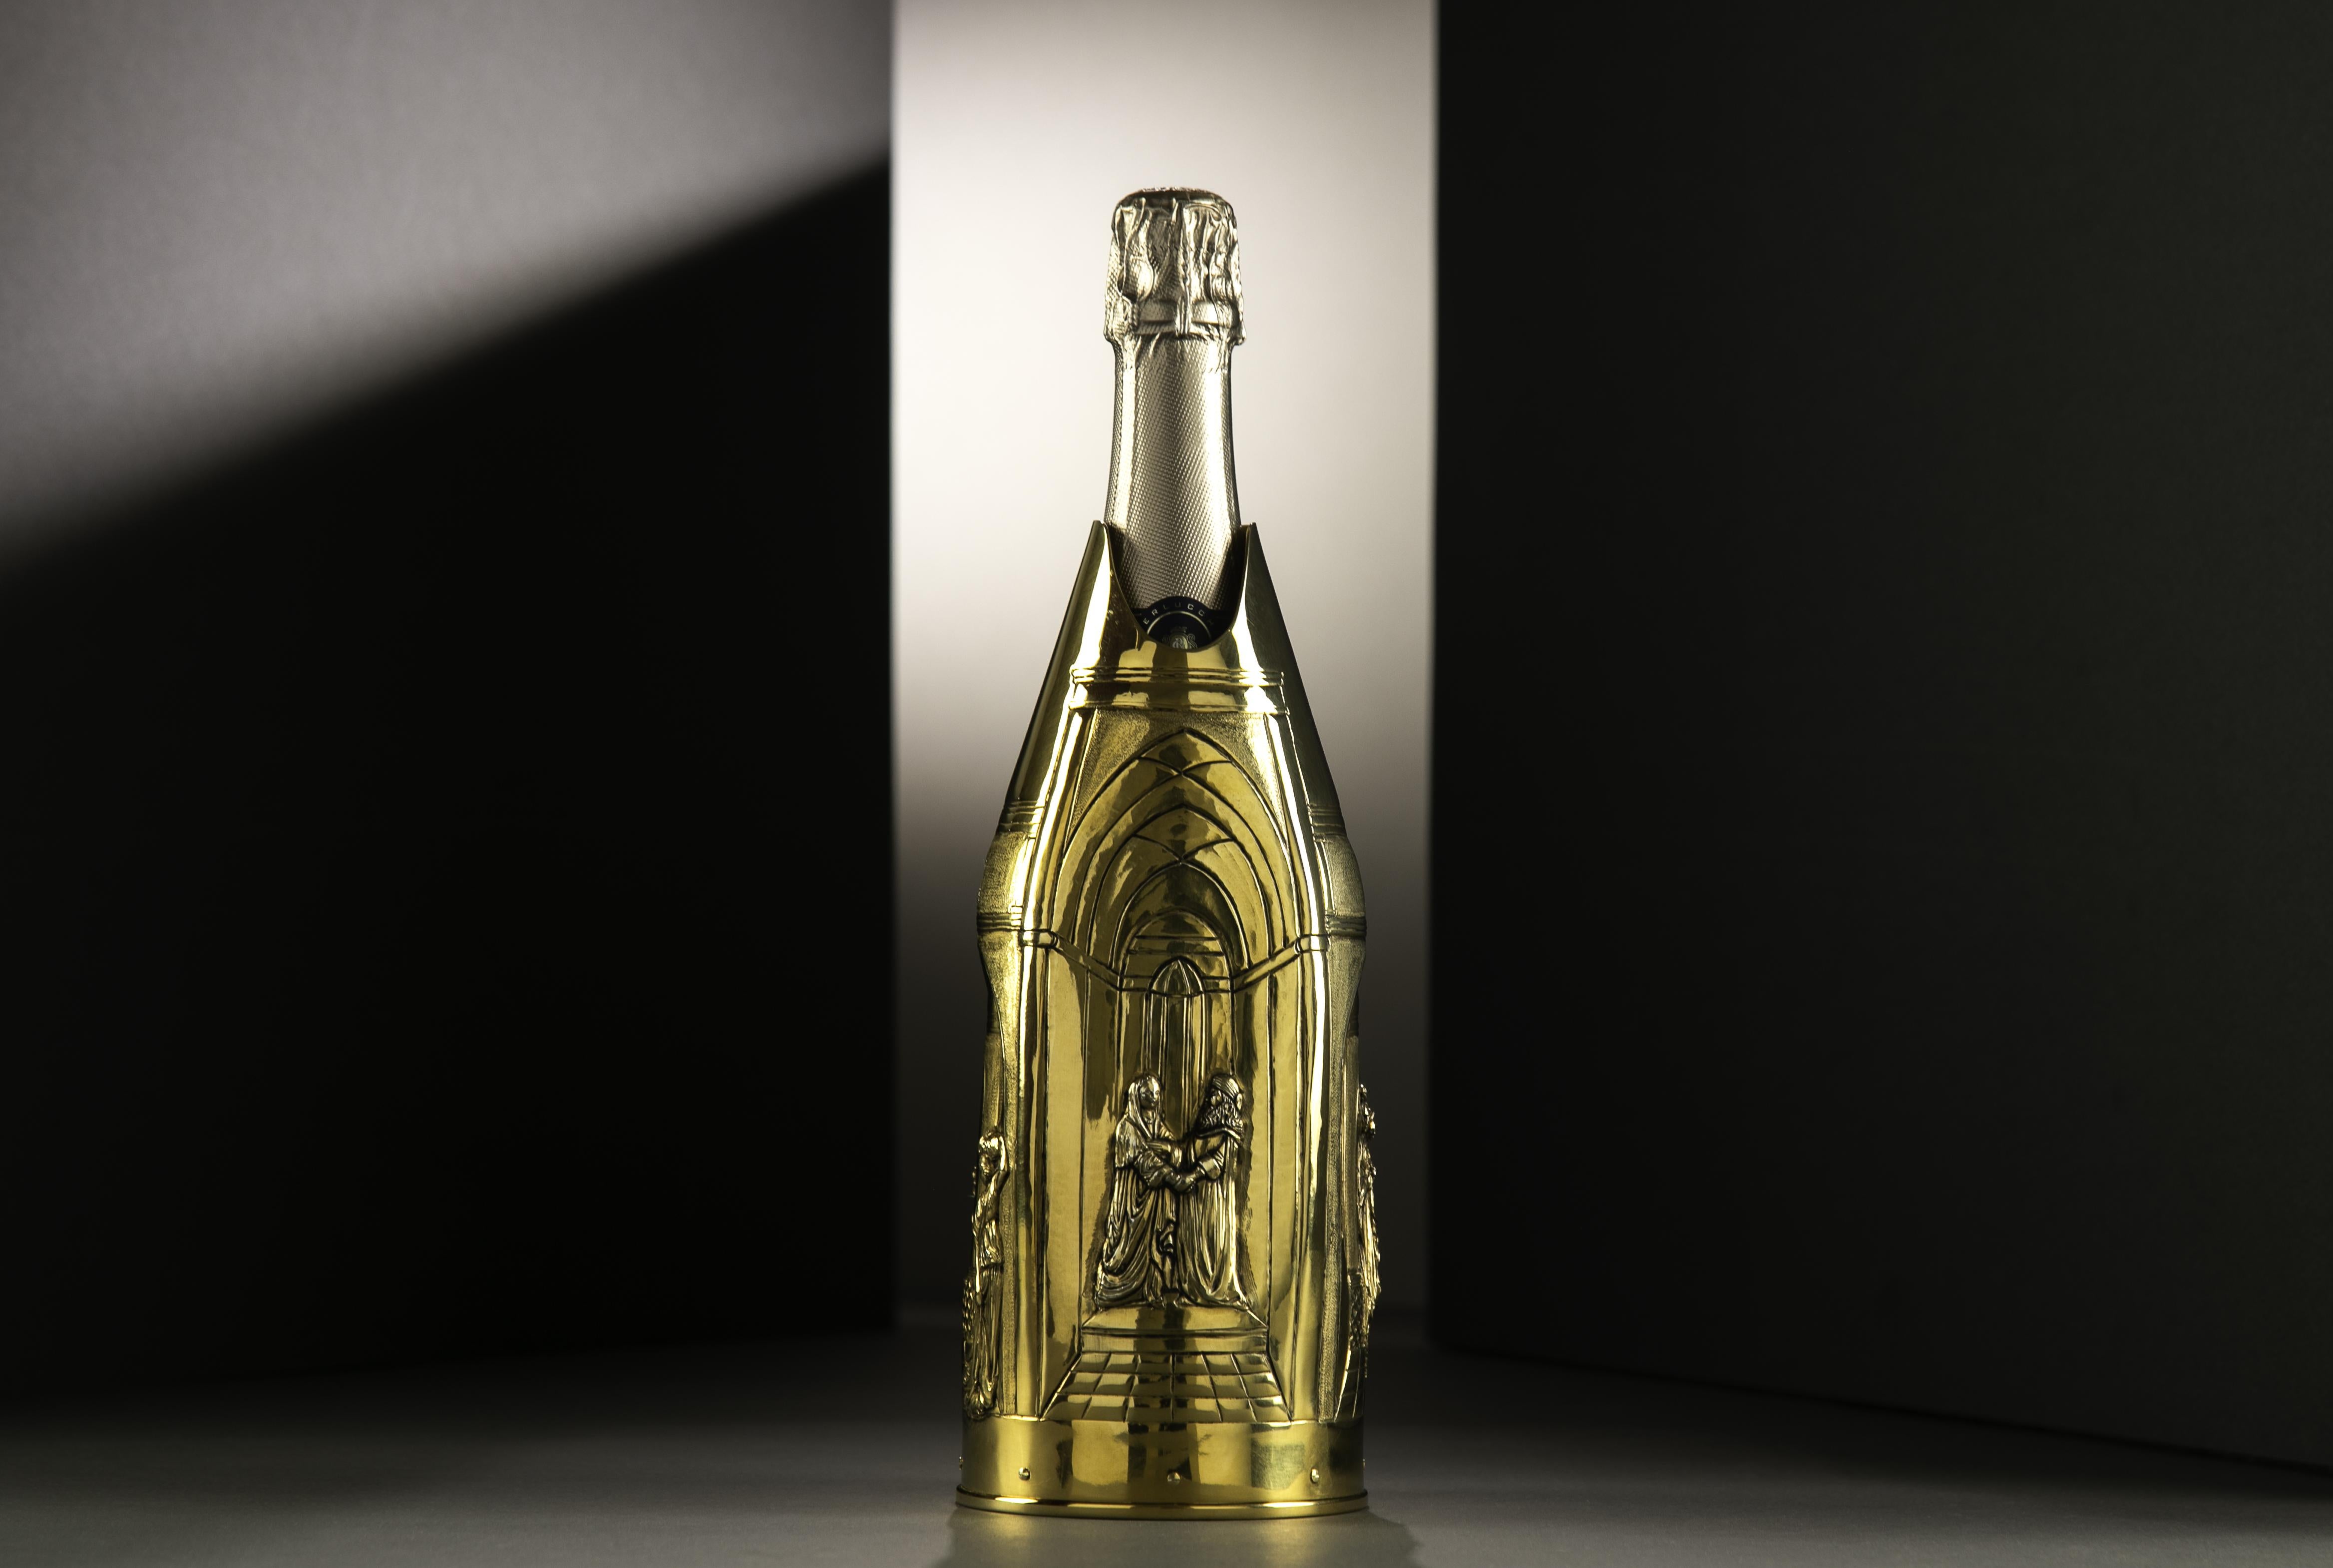 Introducing a unique champagne K-OVER from our Work of Art collection. Hand-chiseled, engraved, and gold-plated by Lorenzo Foglia, our celebrated artist.

Inspired by the renowned Gates of Paradise, Ghiberti’s magnificent sculpture on the Florence